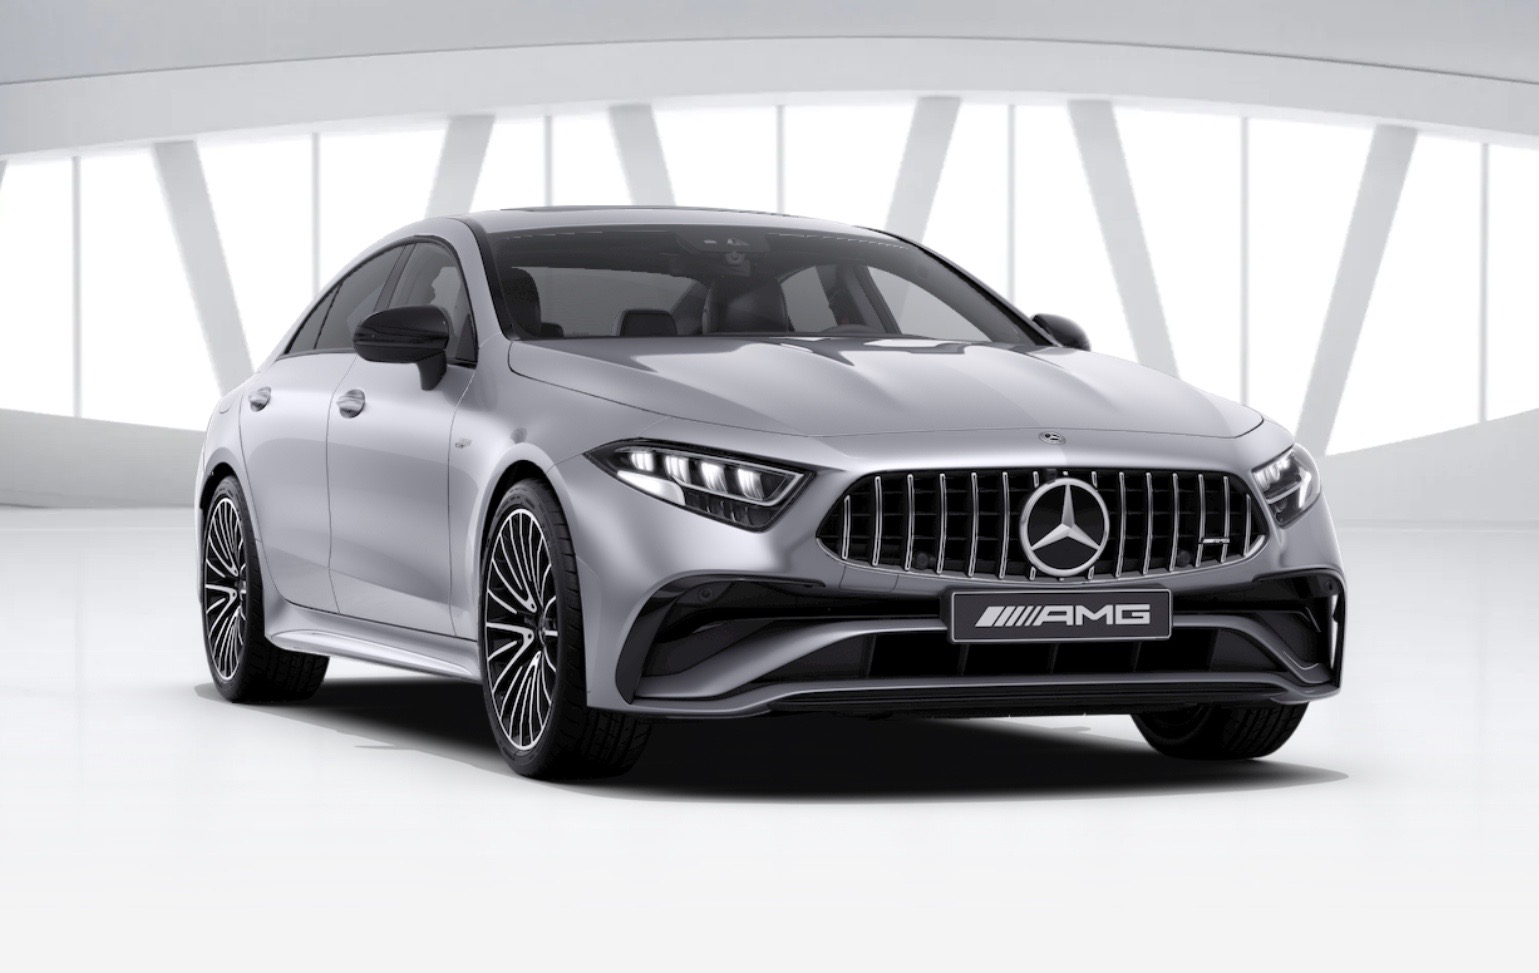 2022 Mercedes-AMG CLS 53 4MATIC+ now on sale in Australia